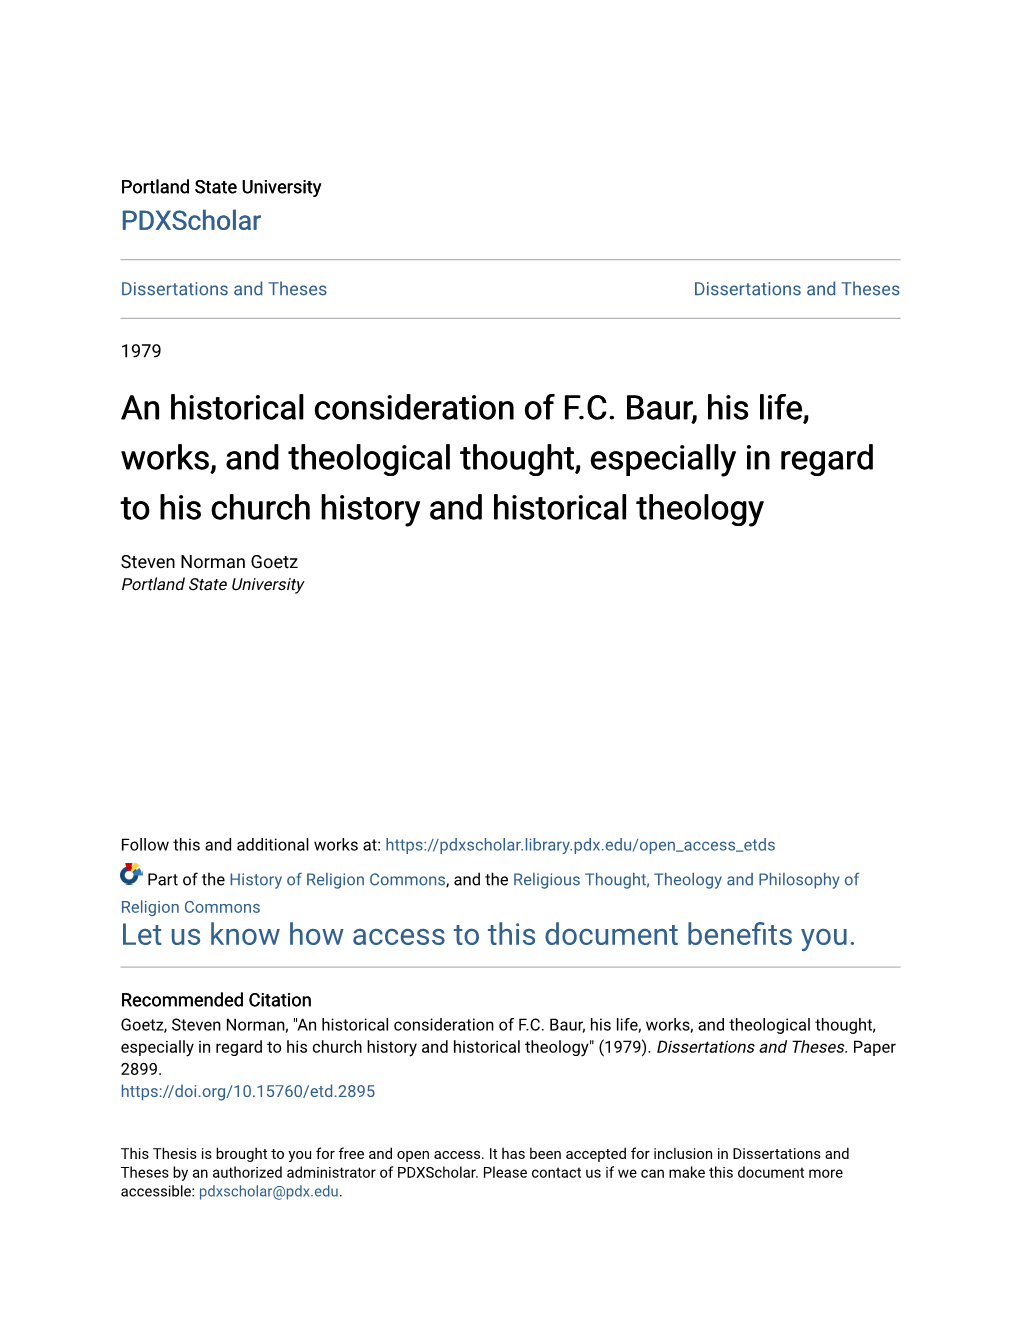 An Historical Consideration of F.C. Baur, His Life, Works, and Theological Thought, Especially in Regard to His Church History and Historical Theology